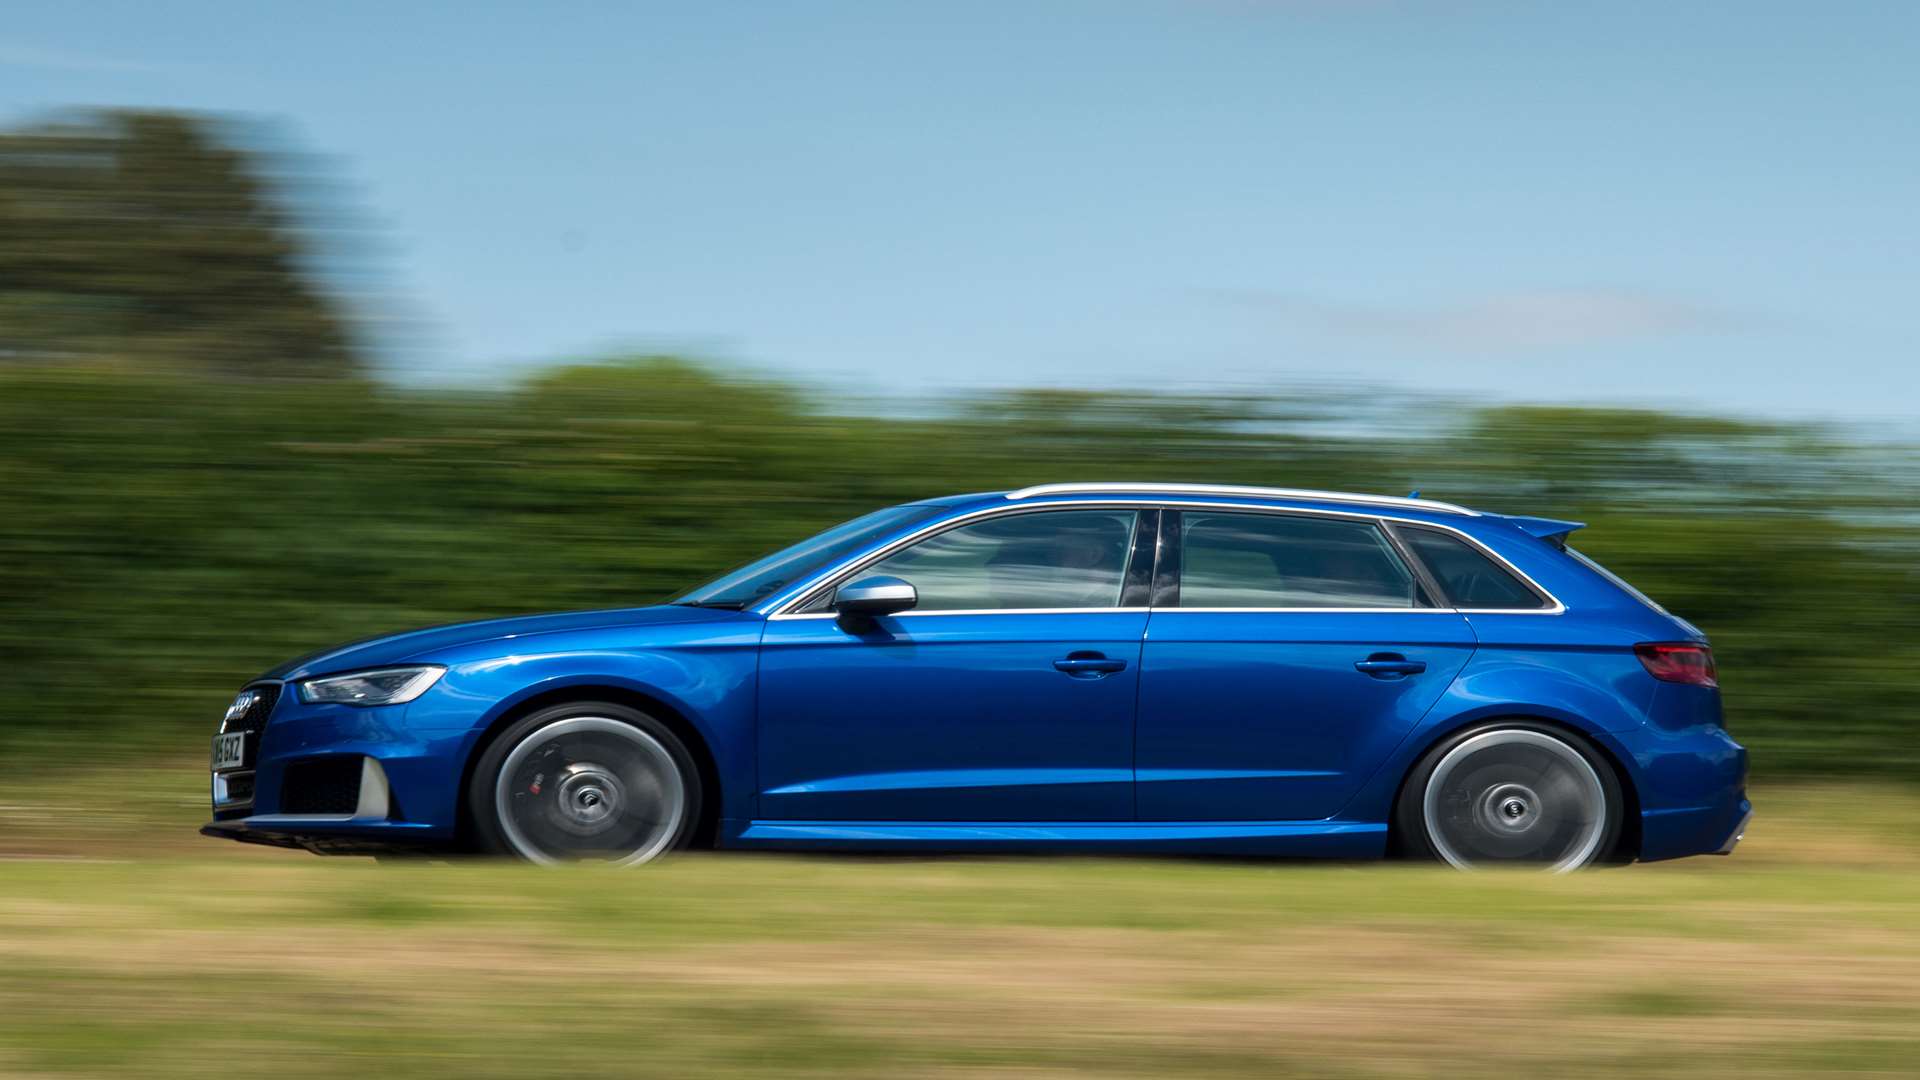 The top speed is electronically limited to just 155mph but, unleashed, the RS3 will hit 174mph